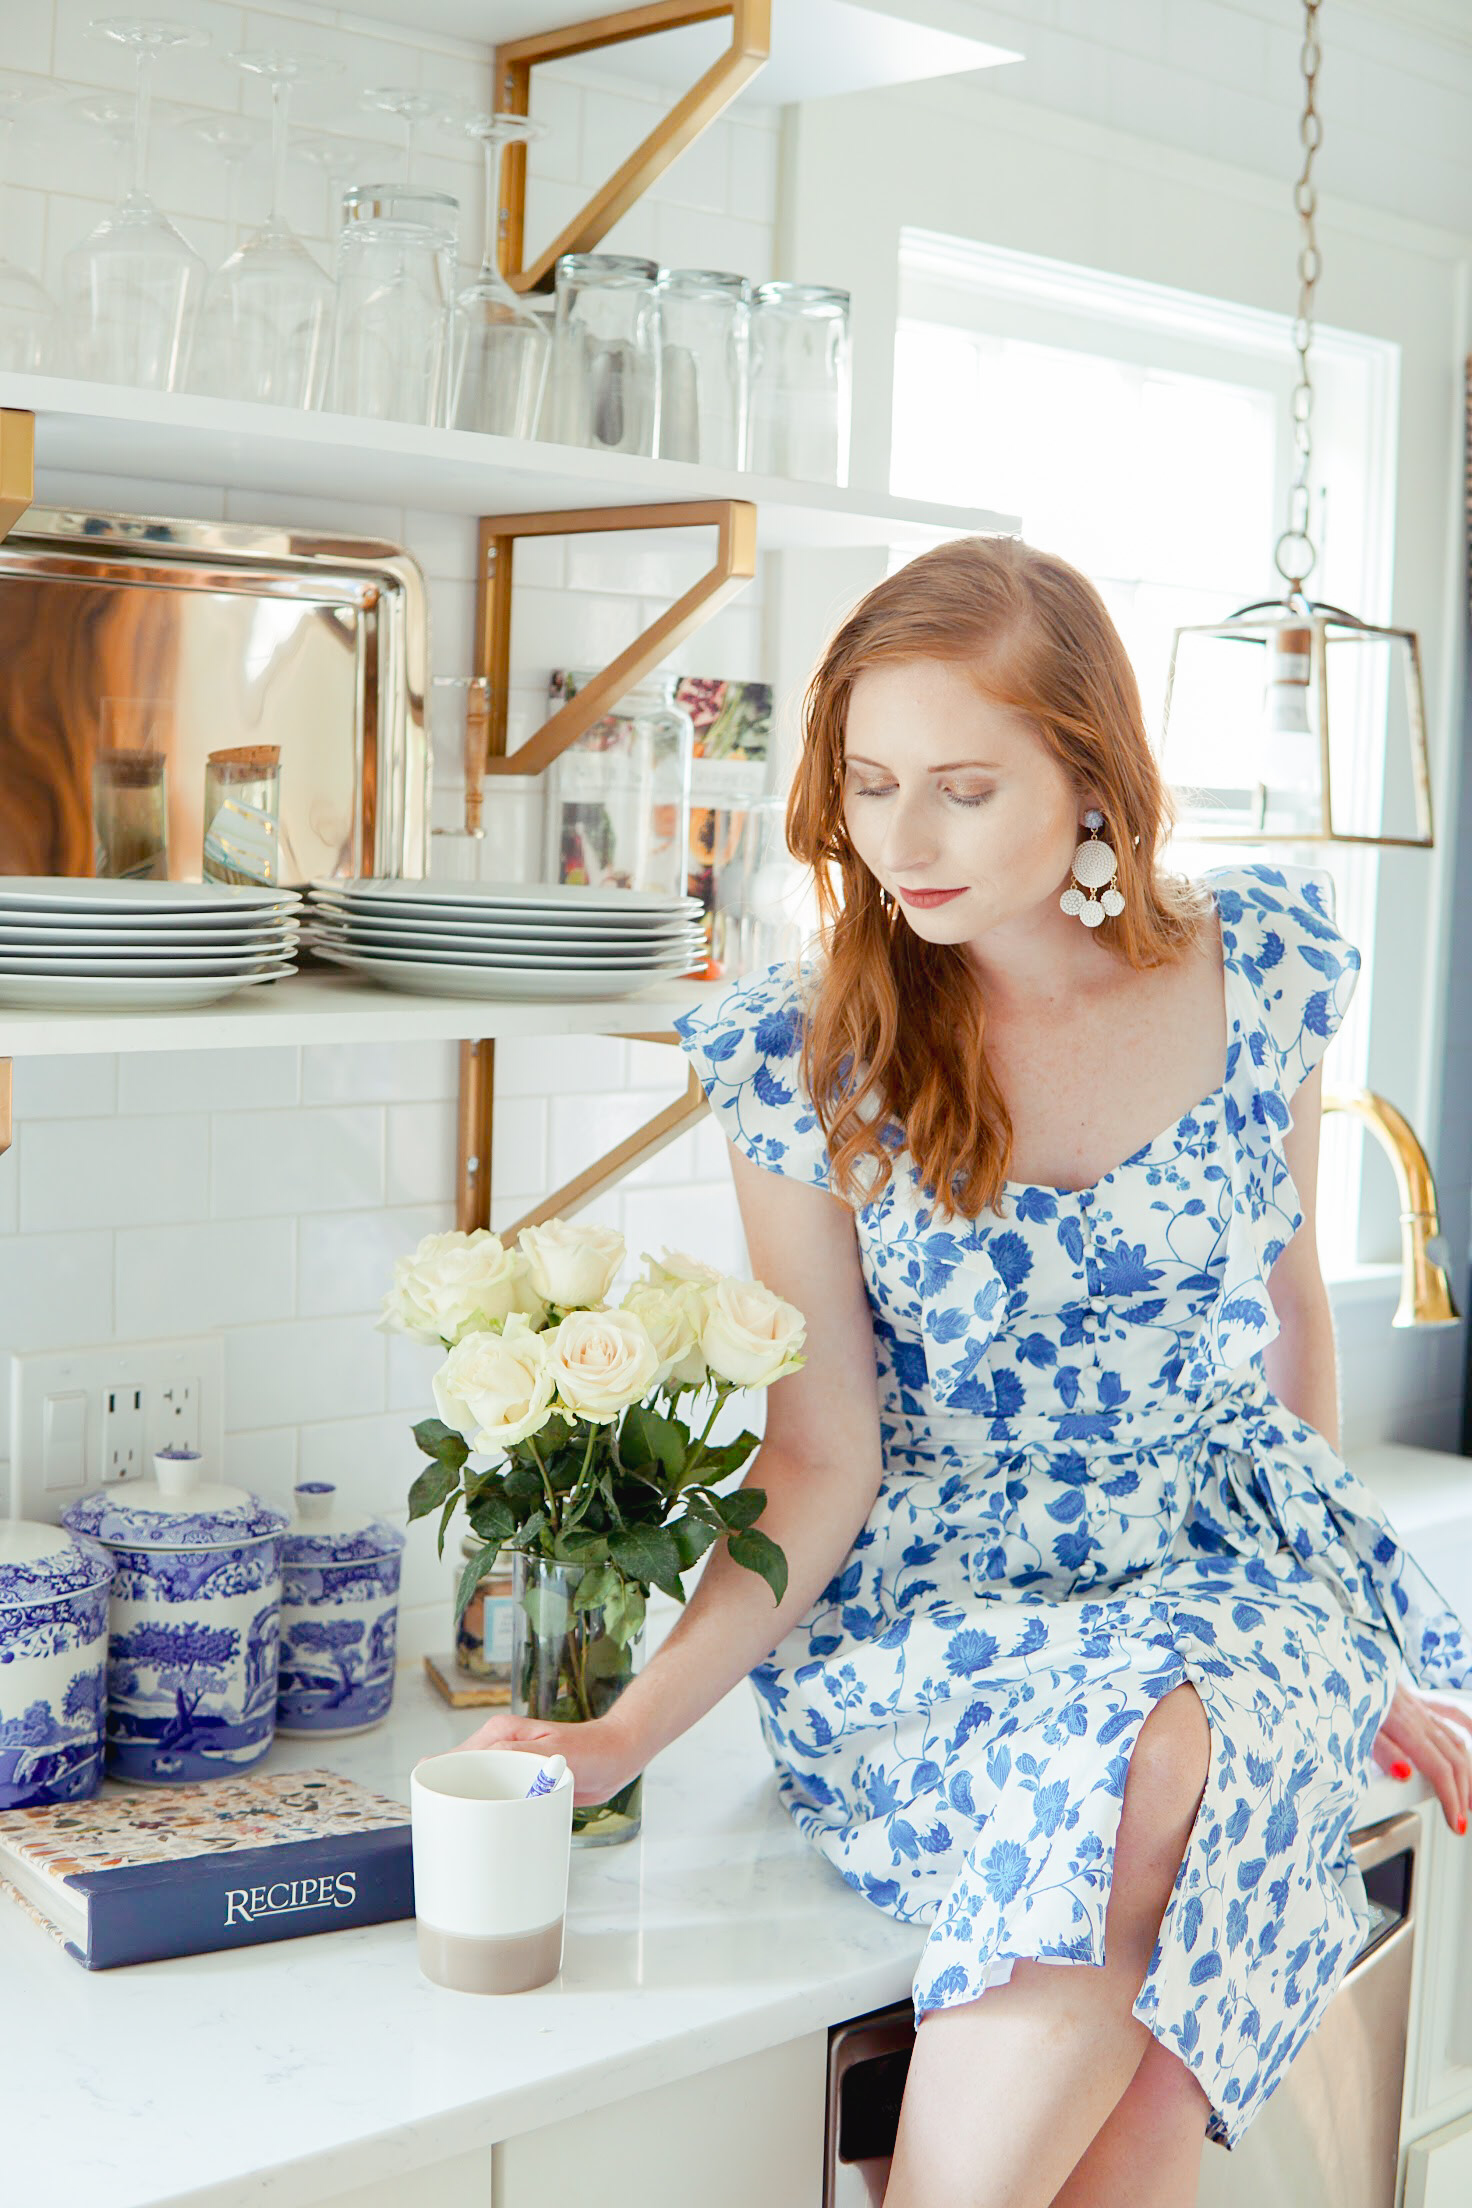 Tips for Working From Home | Amanda Burrows holds a cup of tea inside kitchen. She is wearing a blue and white Gal Meets Glam dress.